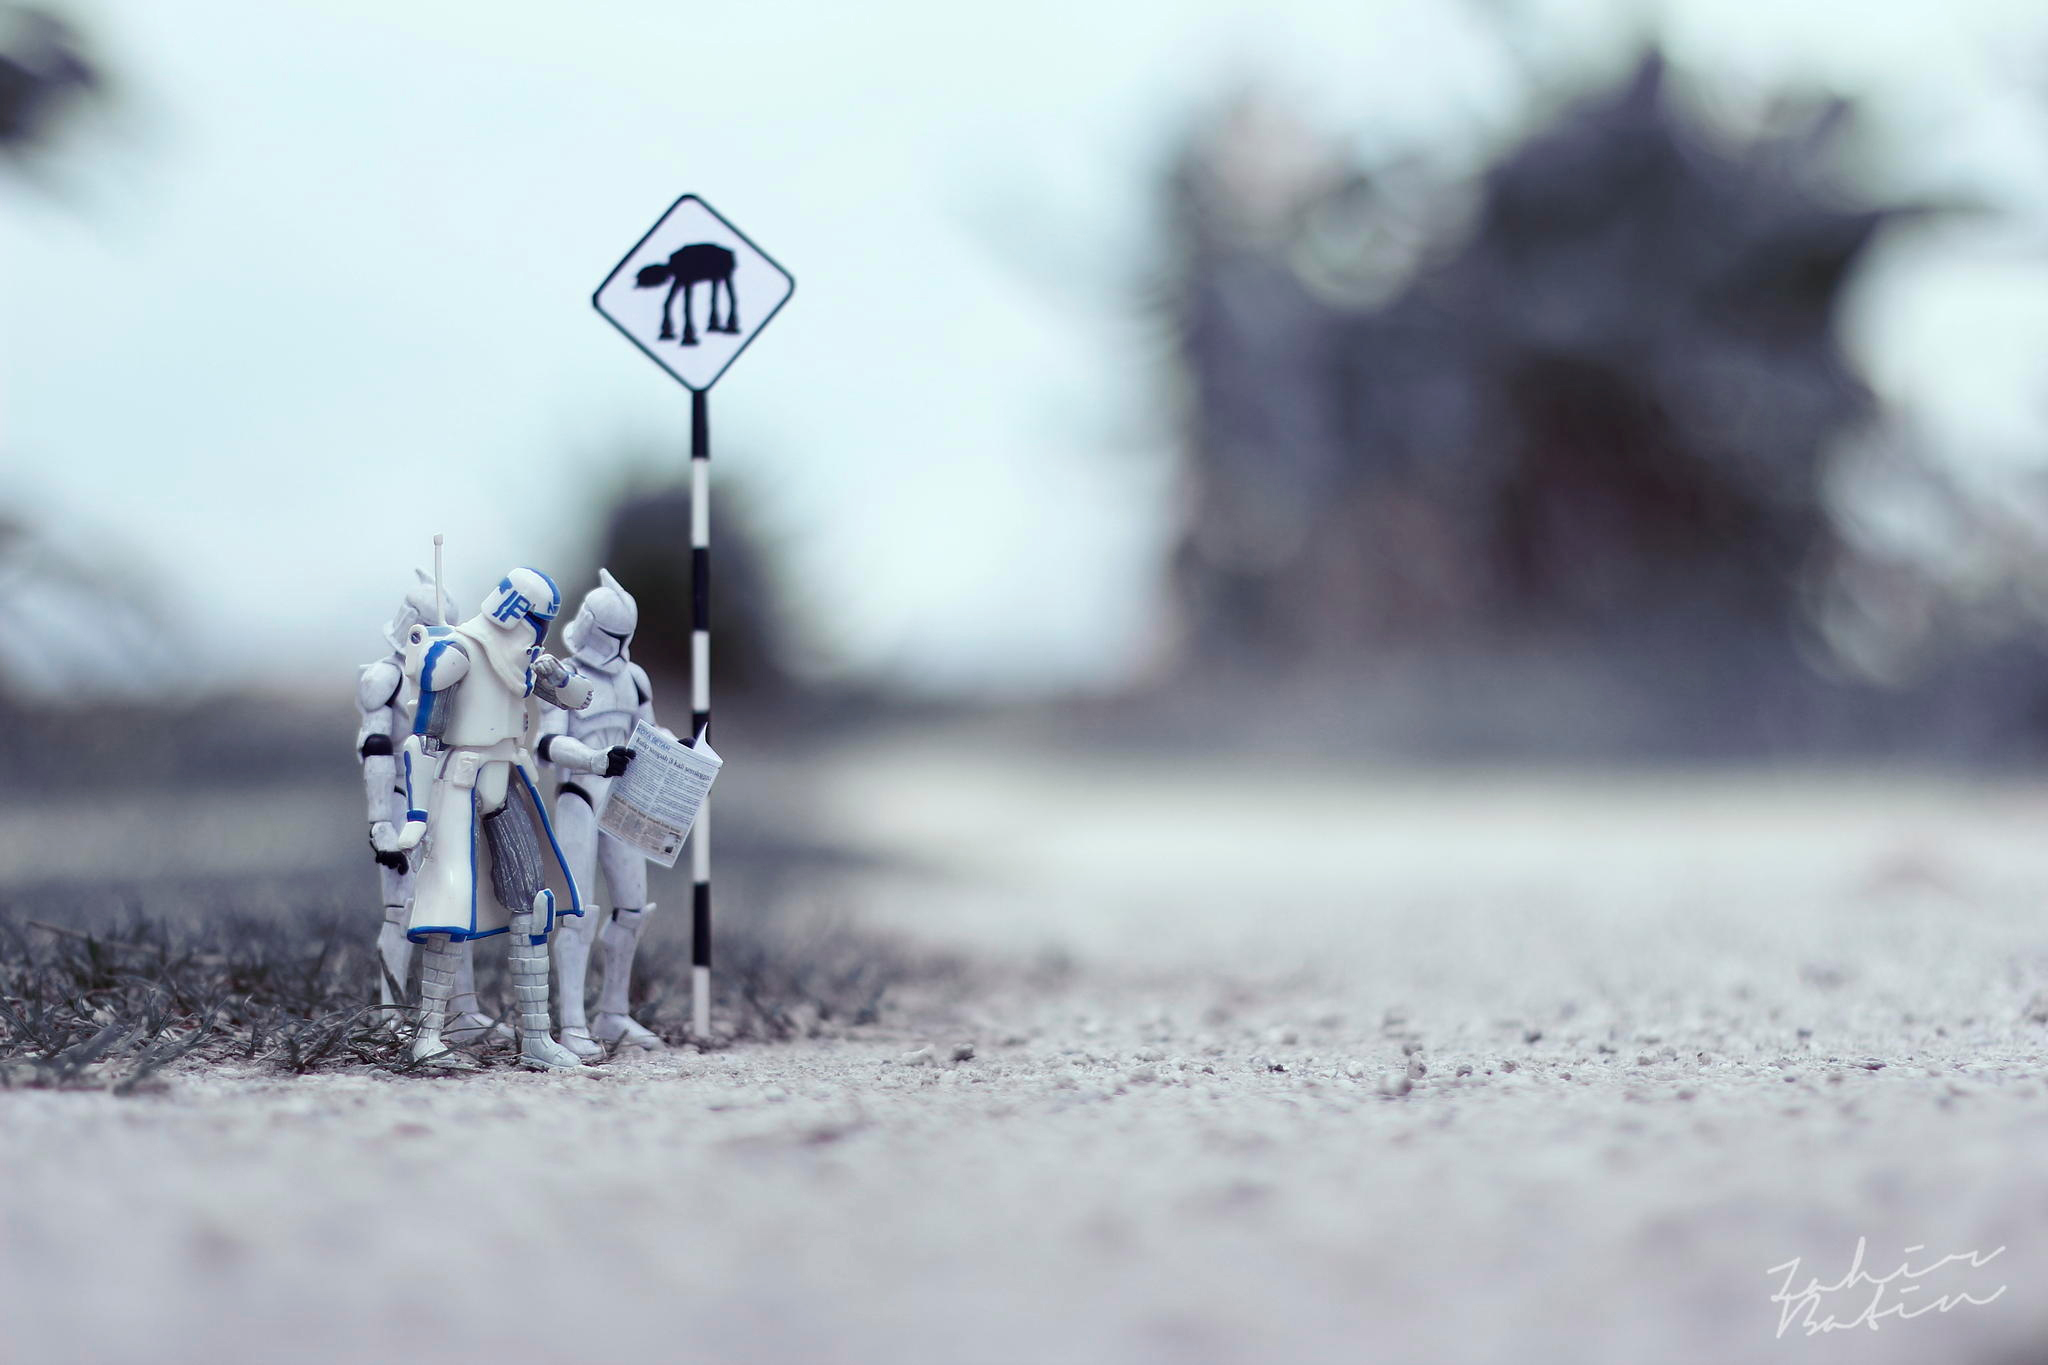 A photo by Zahir Batin shows 3 Stormtrooper figurines consulting a map before crossing the street